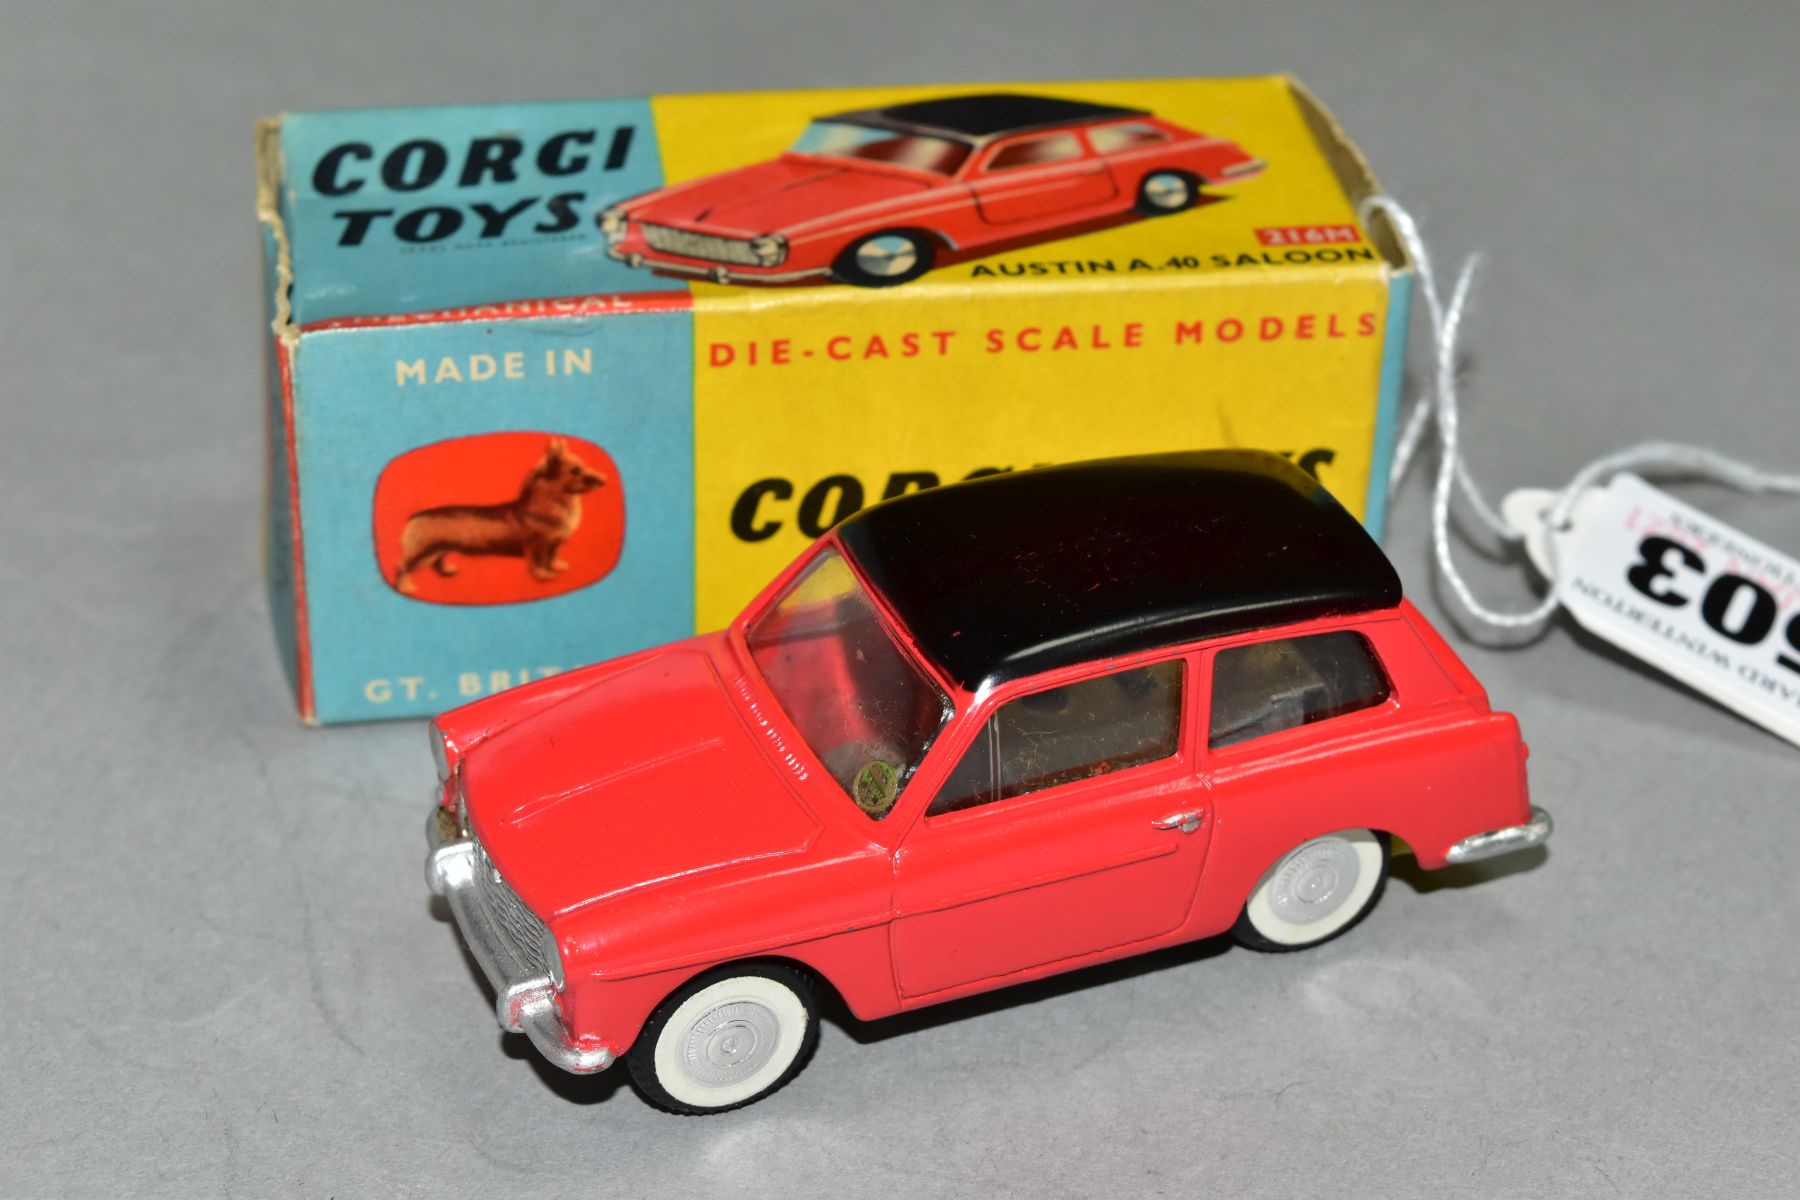 A BOXED CORGI TOYS AUSTIN A40, No 216M, red body with black roof, flat spun hubs with self-